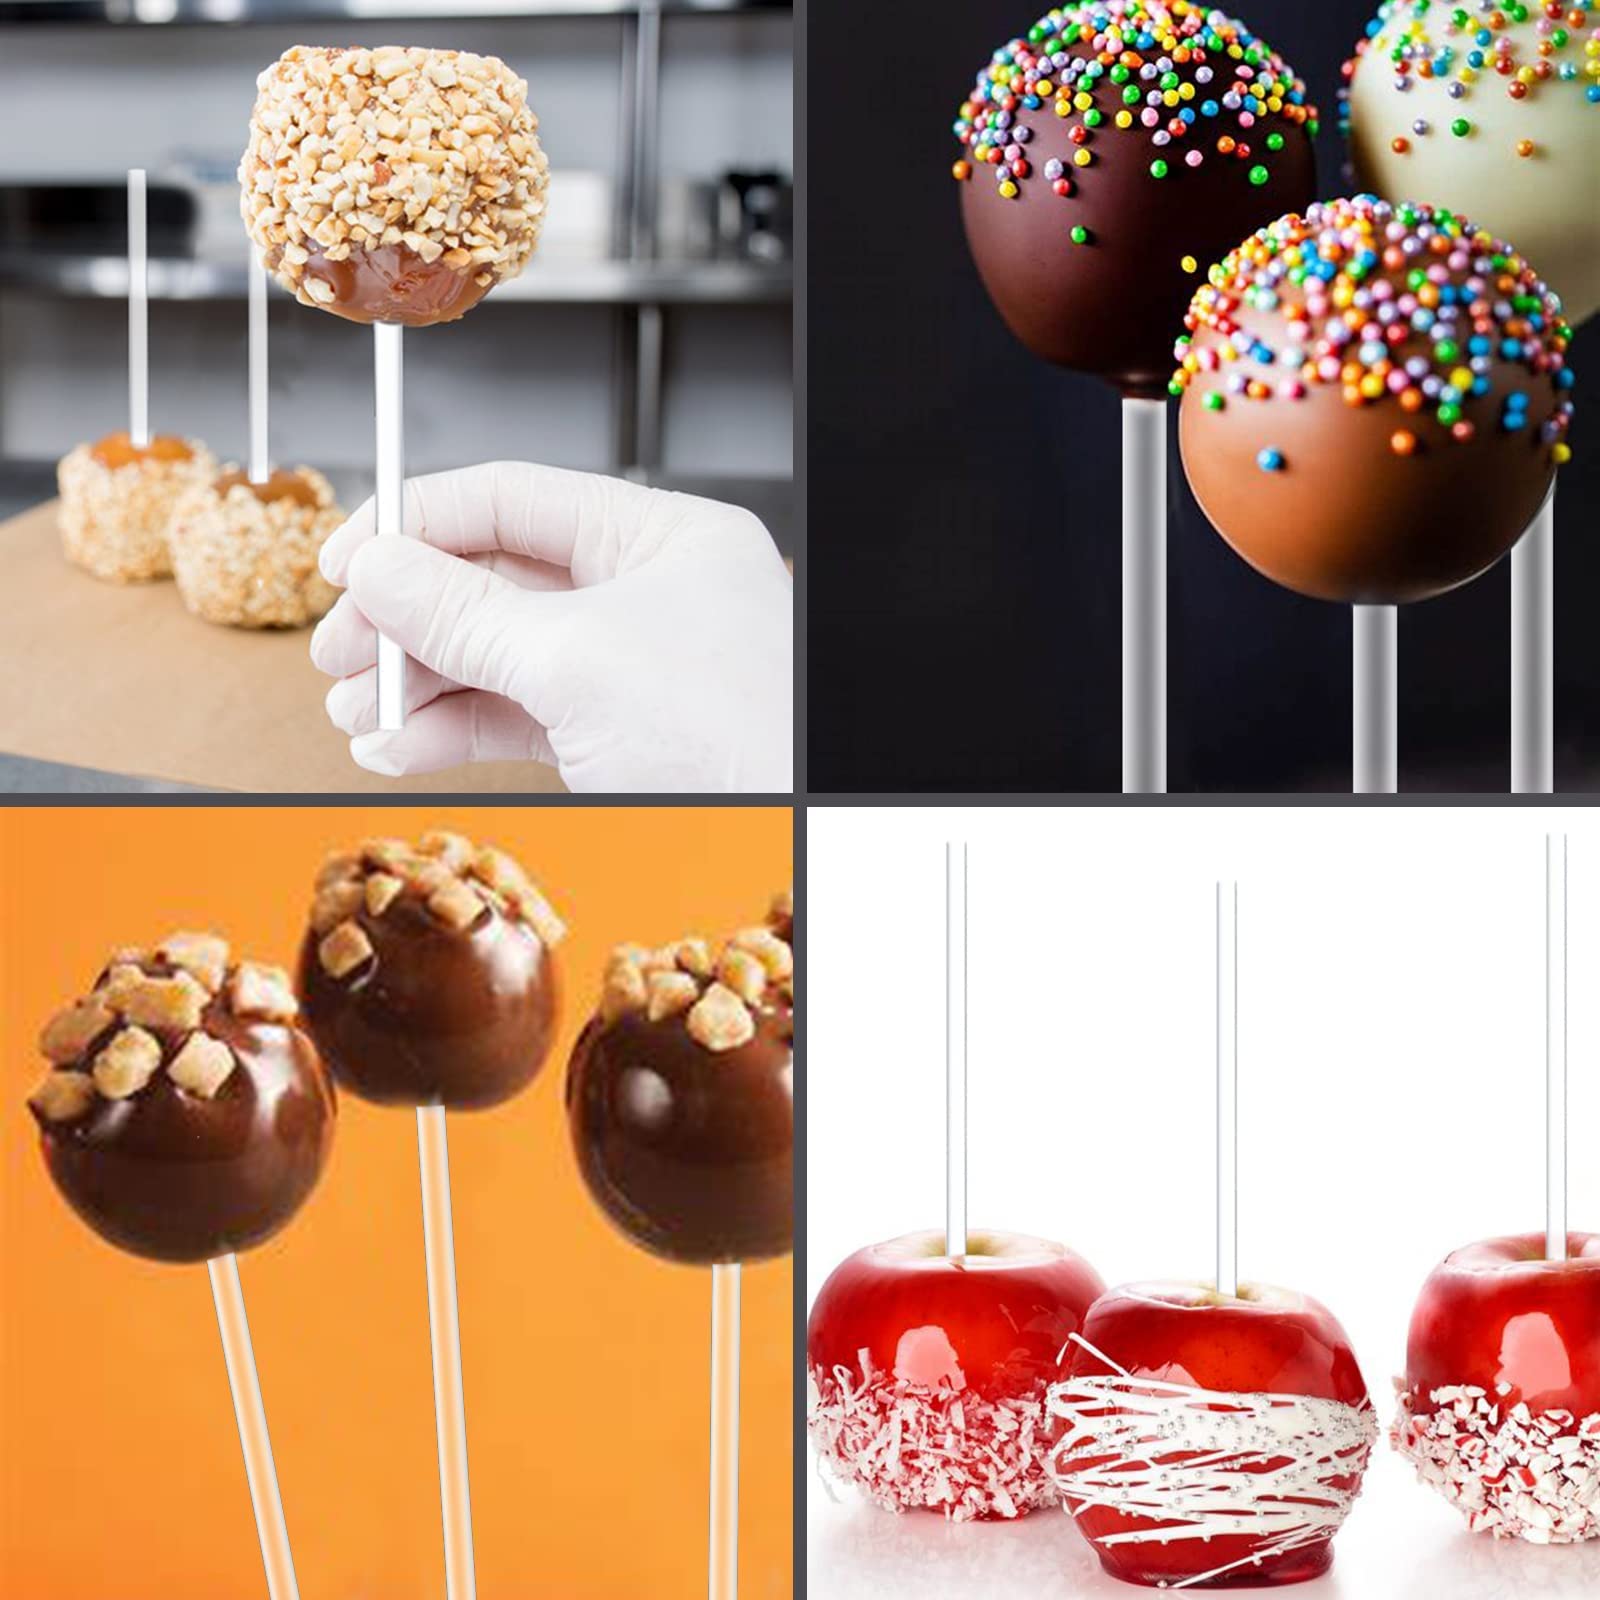 Kamehame 30 Pieces Acrylic Candy Apple Sticks 6 Inch Clear Pointed Acrylic Rods for Cake Pops or Dessert Caramel Apple Chocolate Covered Apples 6mm Diameter